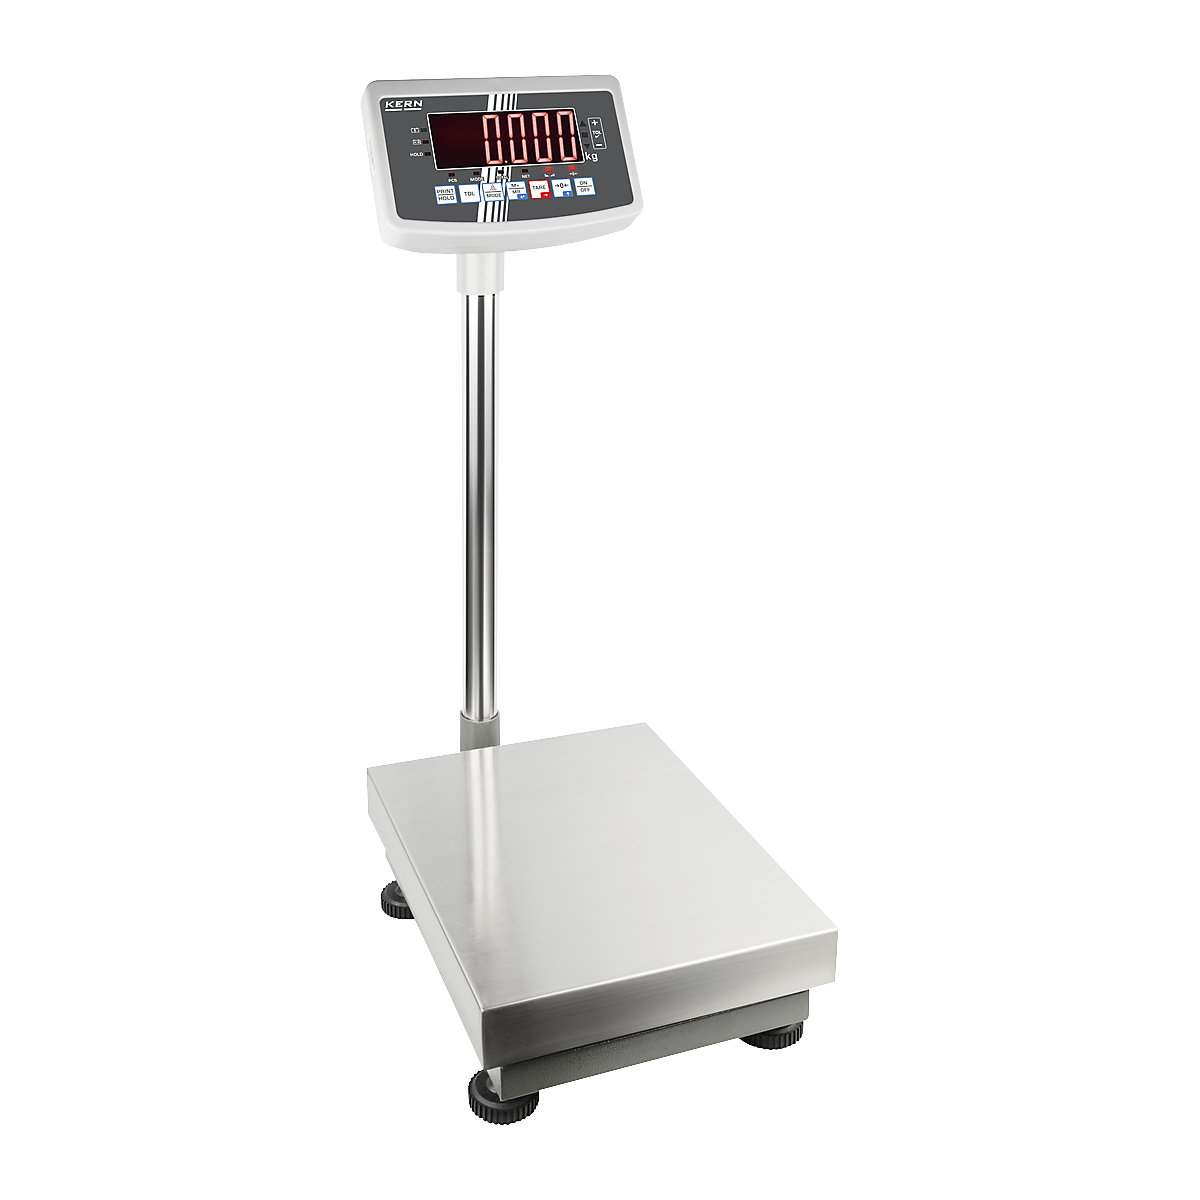 Platform scales – KERN, incl. tripod, weighing range up to 60 kg, read-out accuracy 5 g-1